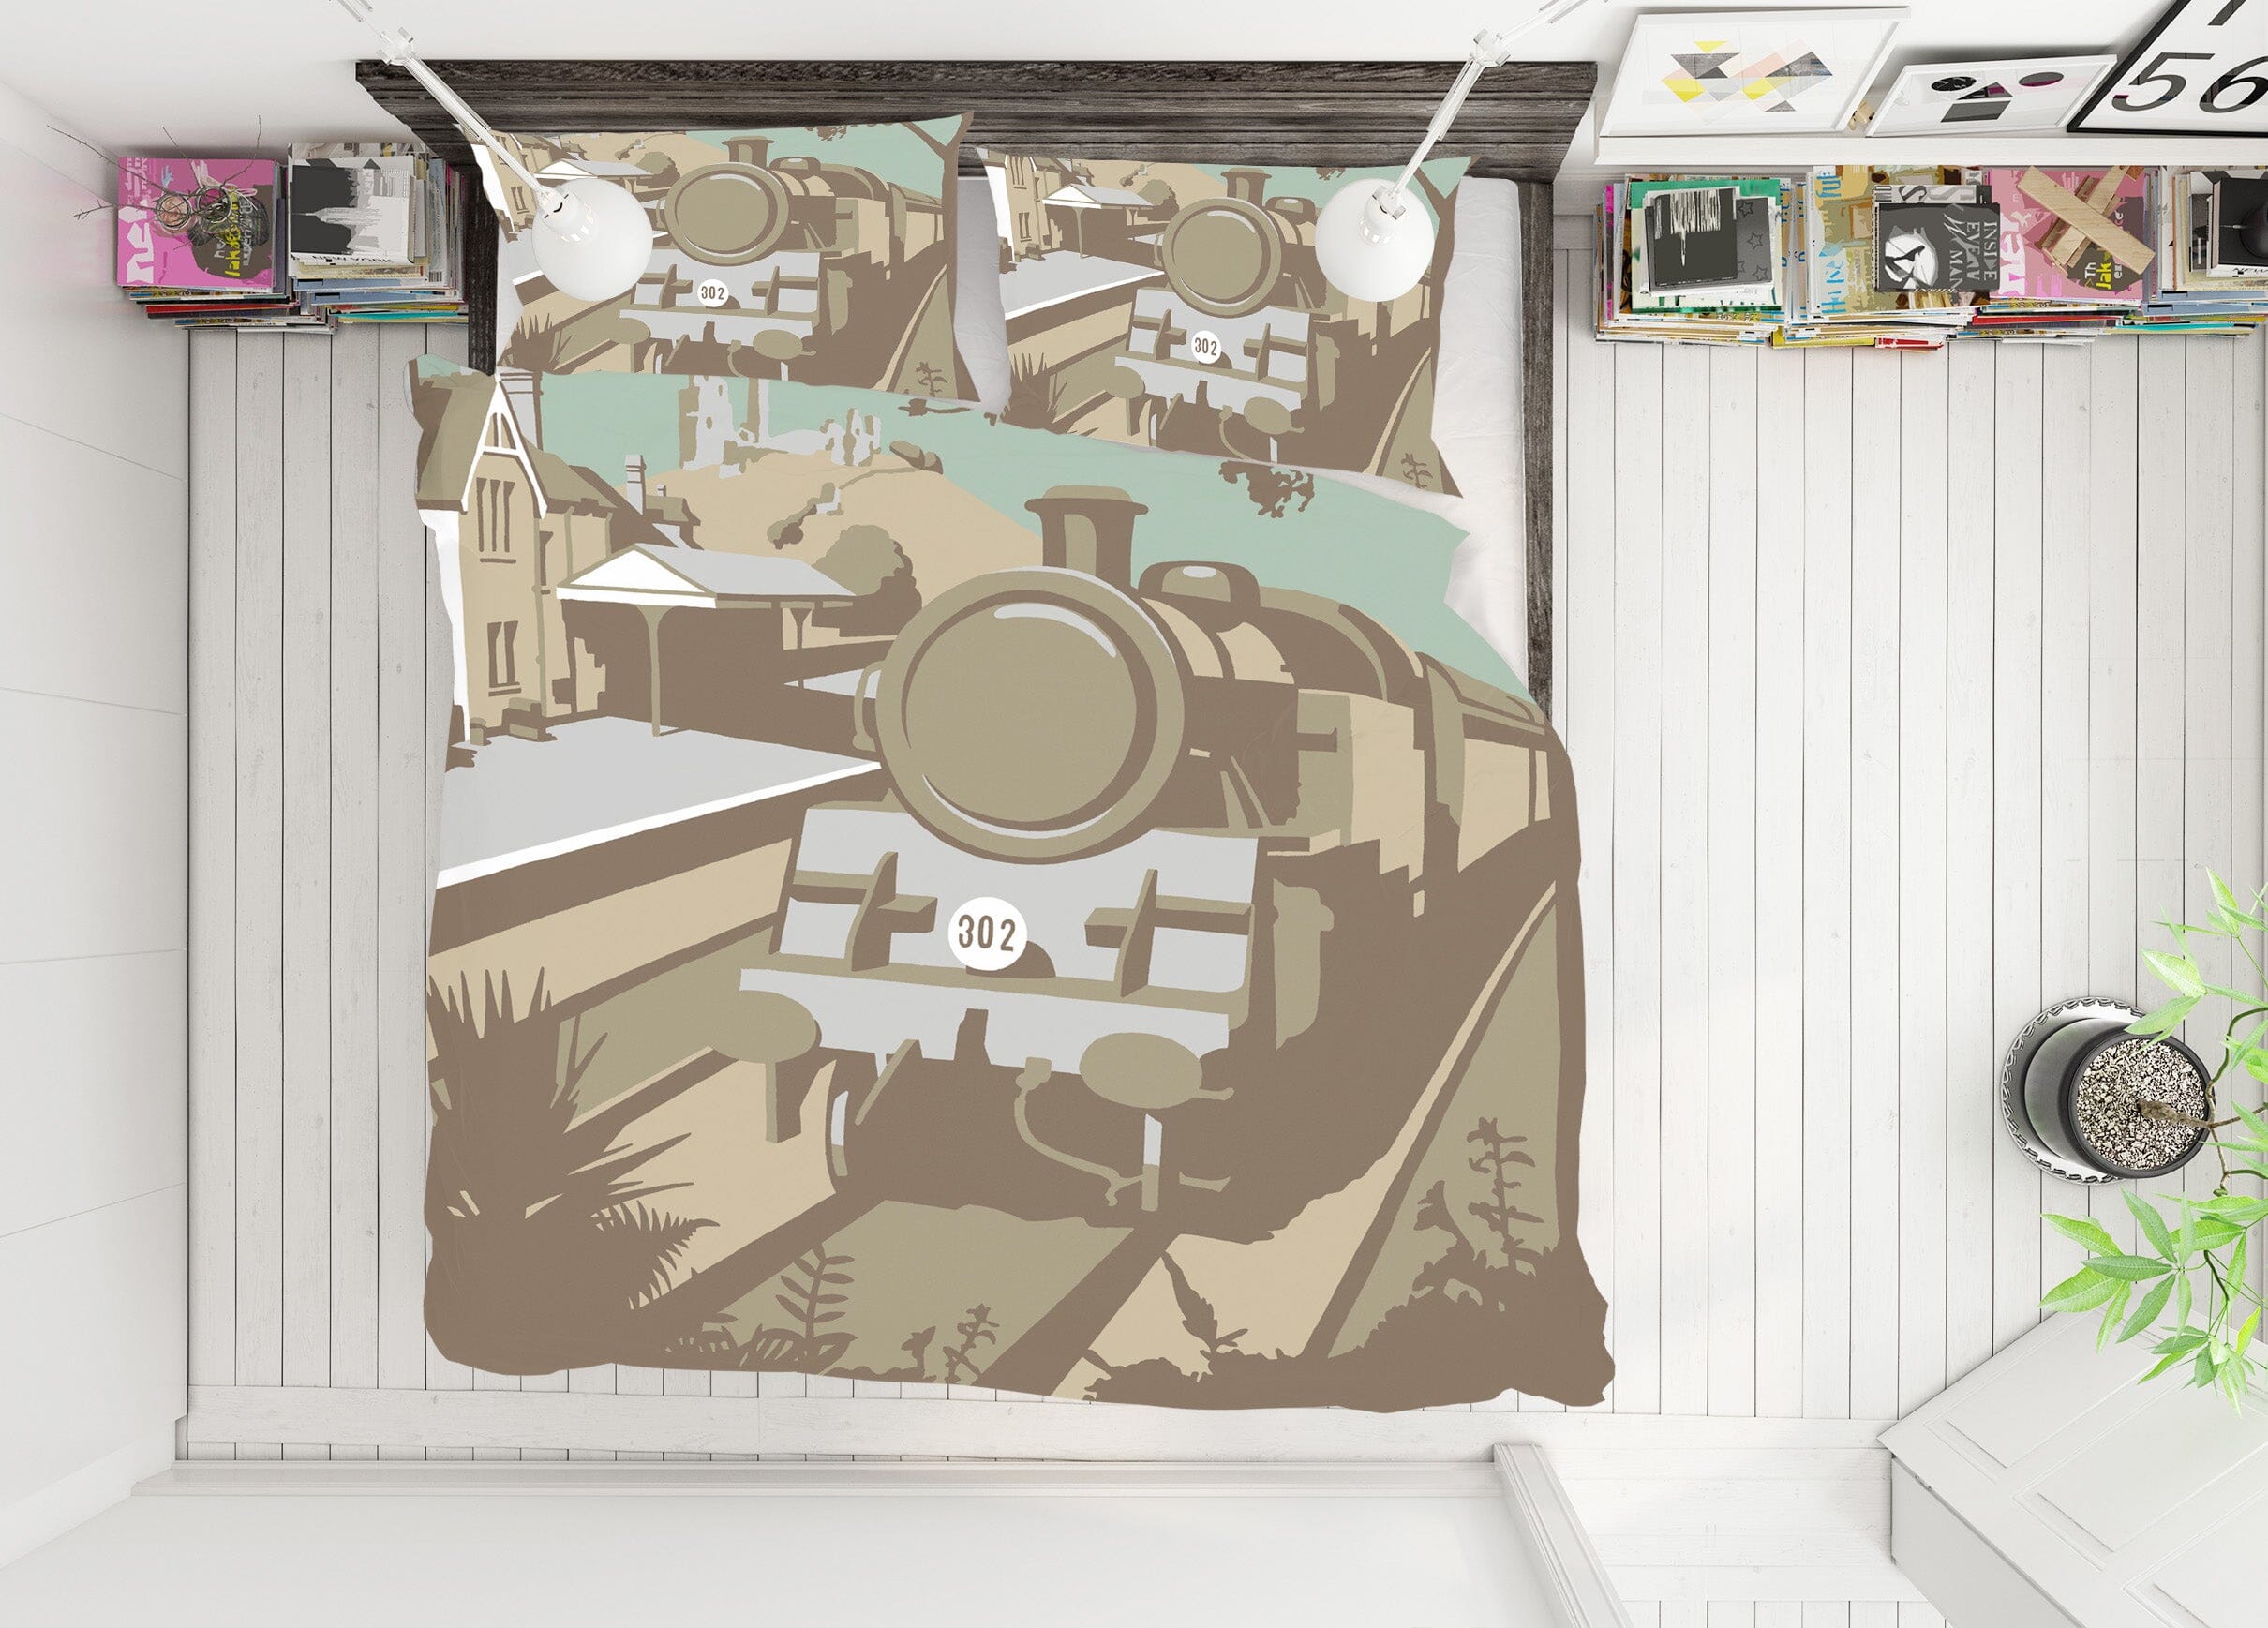 3D Swanage Railway 2071 Steve Read Bedding Bed Pillowcases Quilt Quiet Covers AJ Creativity Home 